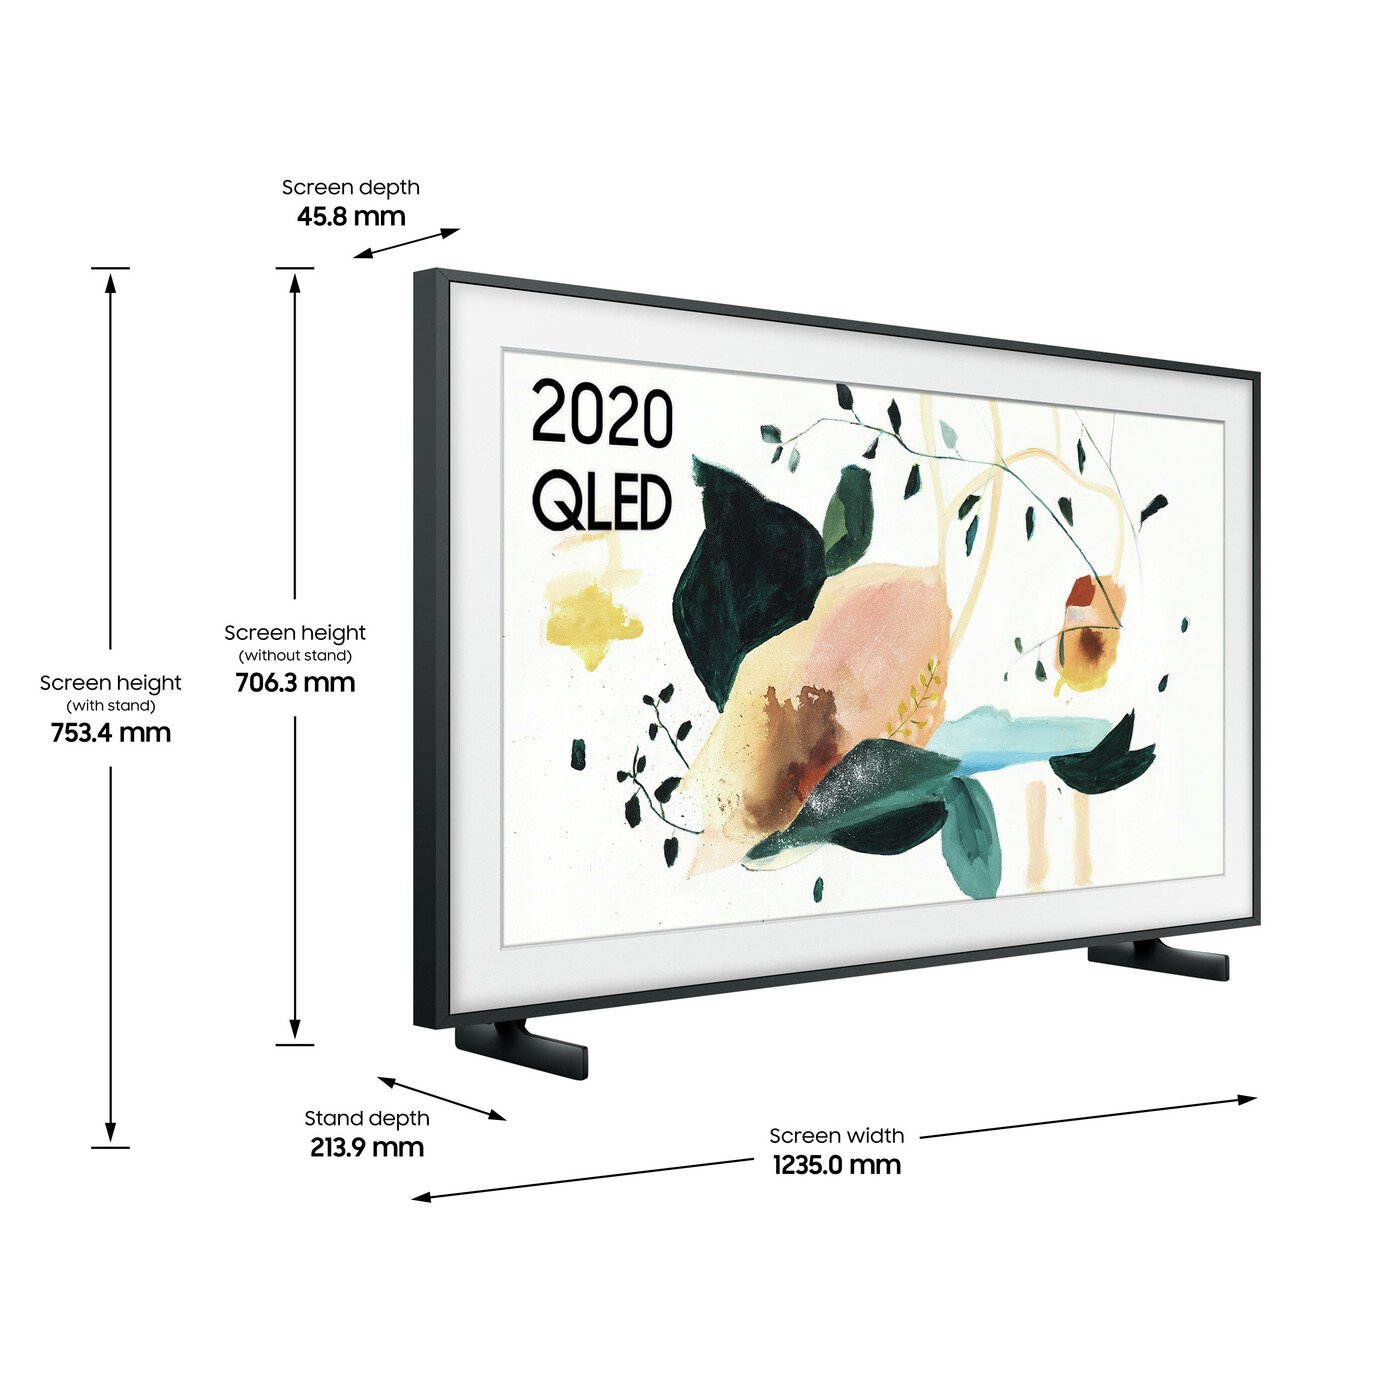 Samsung The Frame 55 Inch QE55LS03T Smart QLED TV with HDR Review